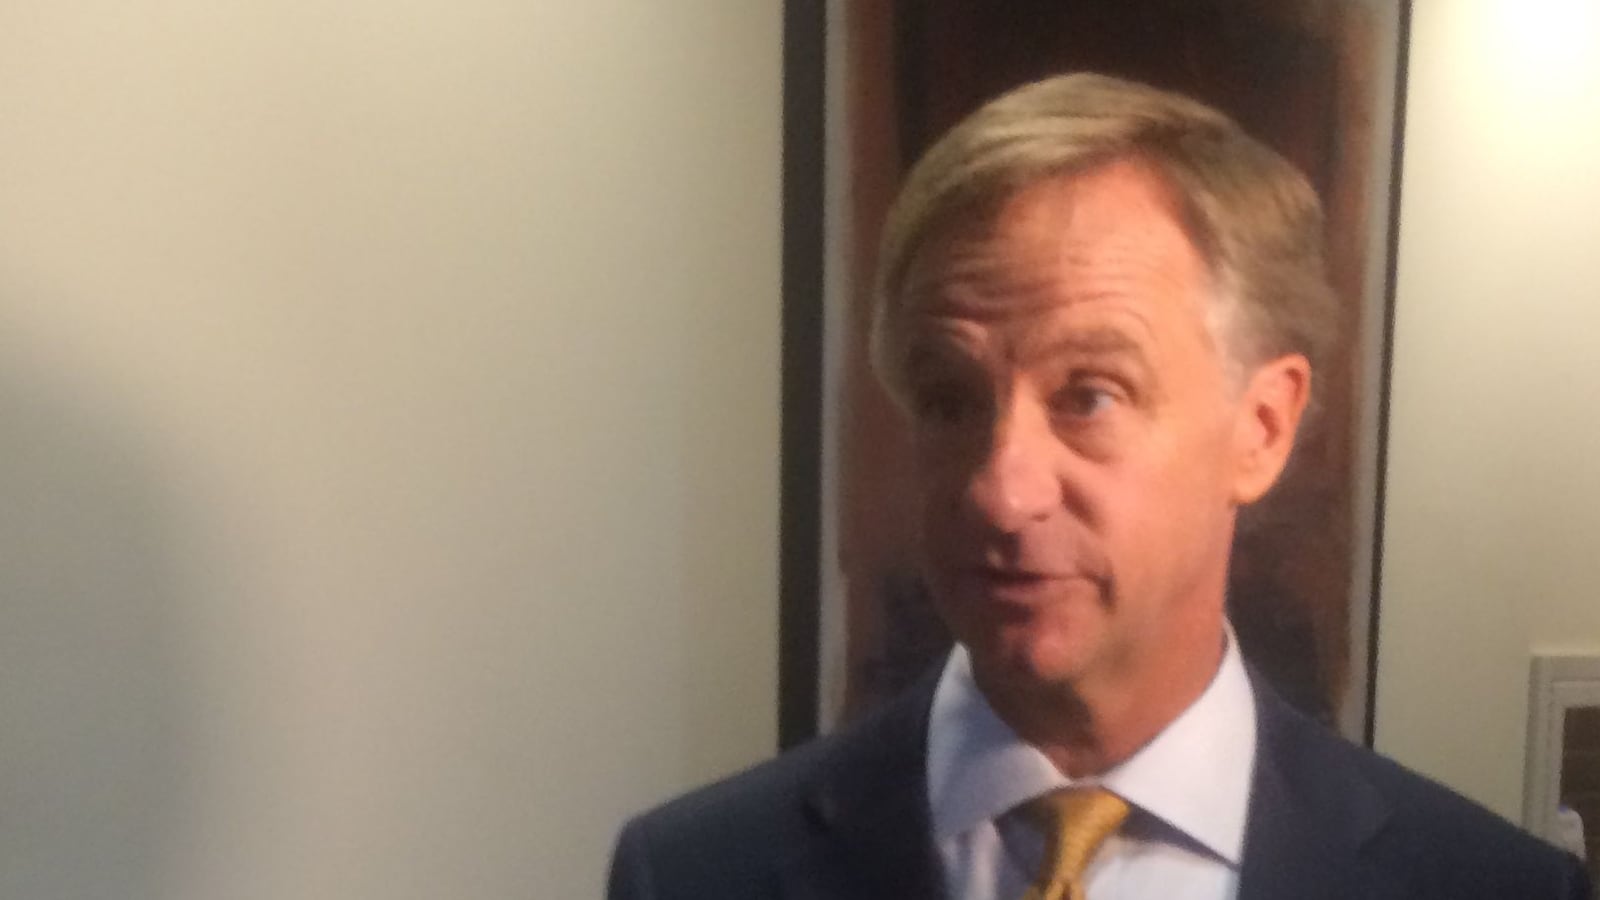 Gov. Bill Haslam responds to journalists' questions about Education Commissioner Huffman